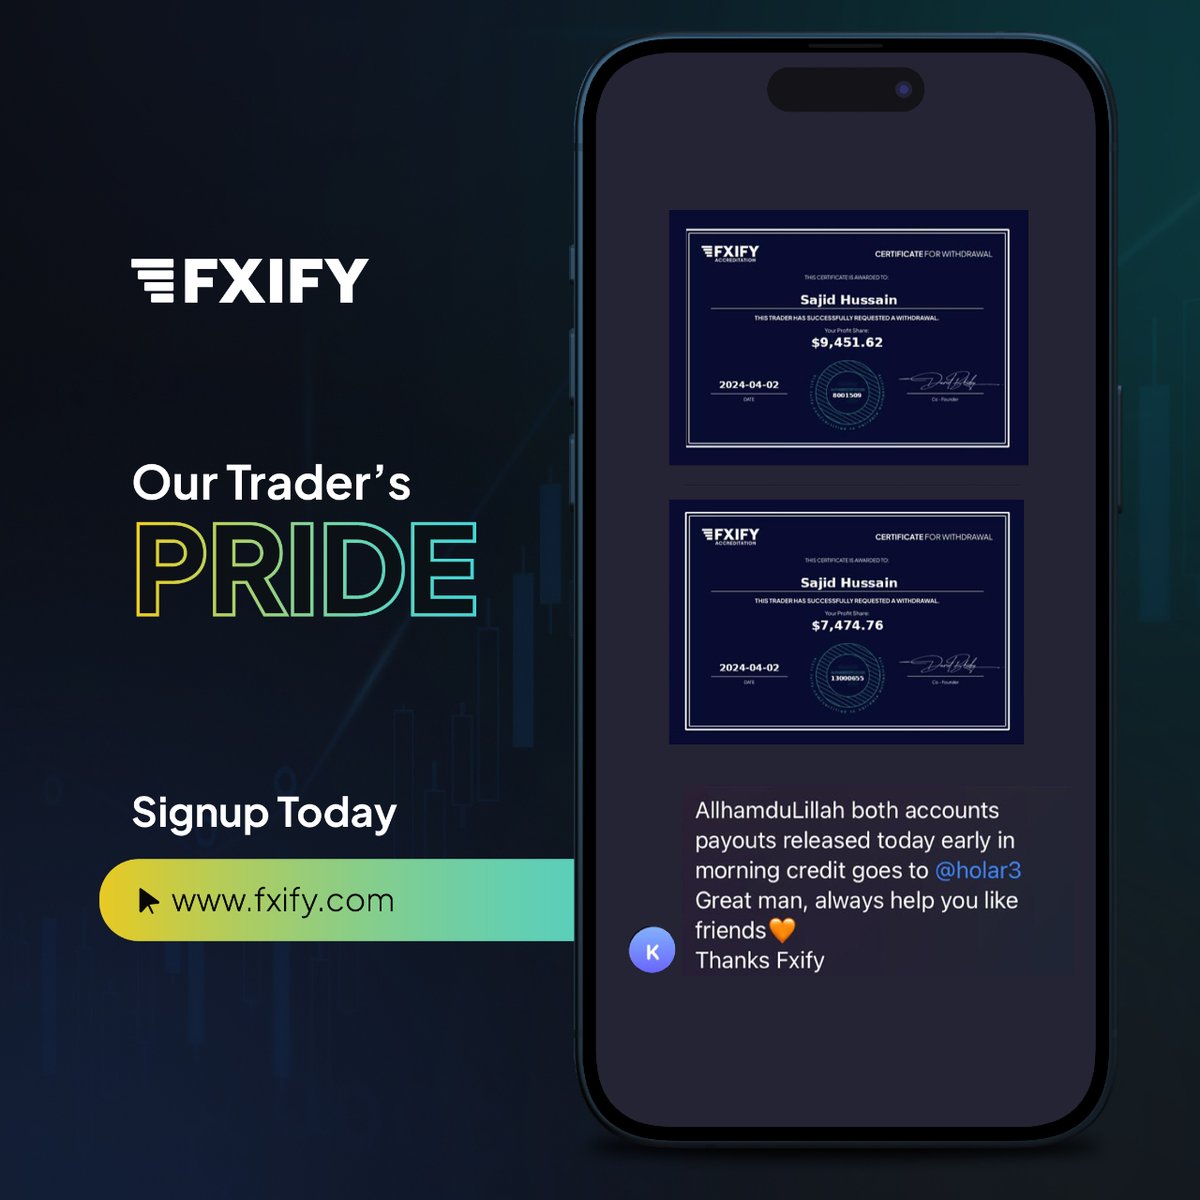 ⭐⭐⭐⭐⭐ A Satisfied Trader's Experience! If you're looking for a prop firm that puts you first, FXIFY is the way to go!